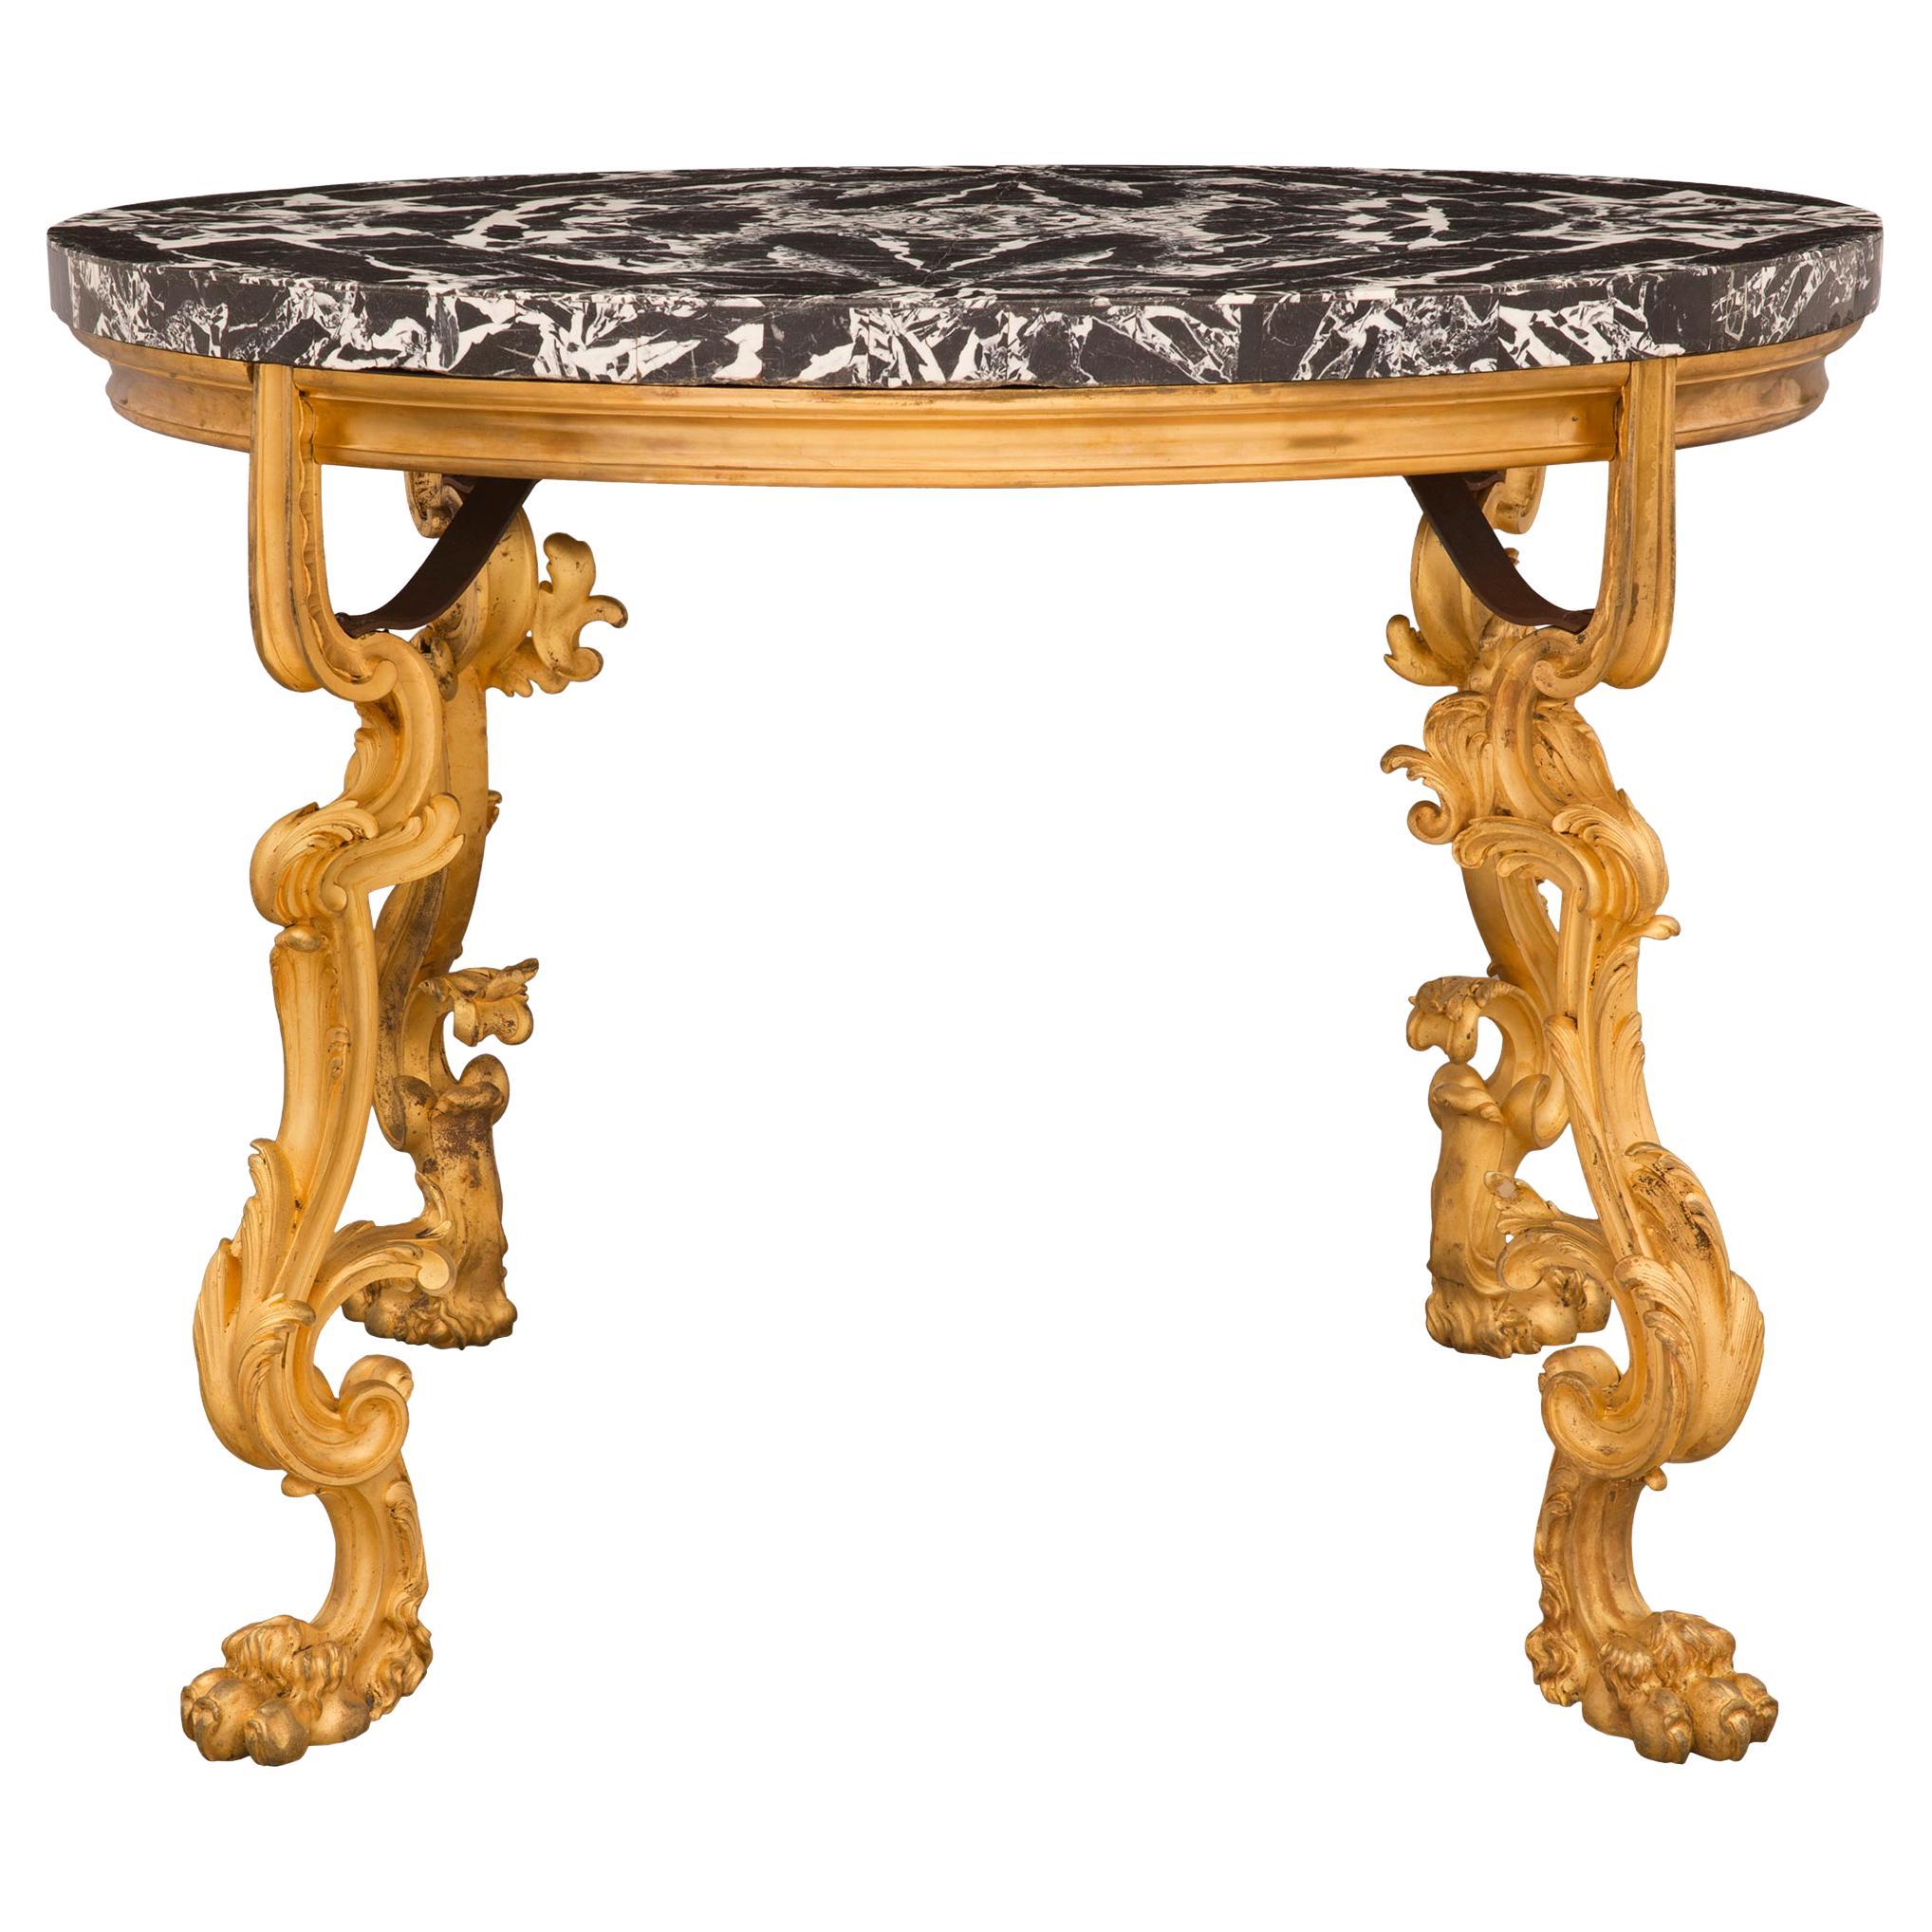 French Mid-19th Century Louis XV Style Oval Center Table For Sale